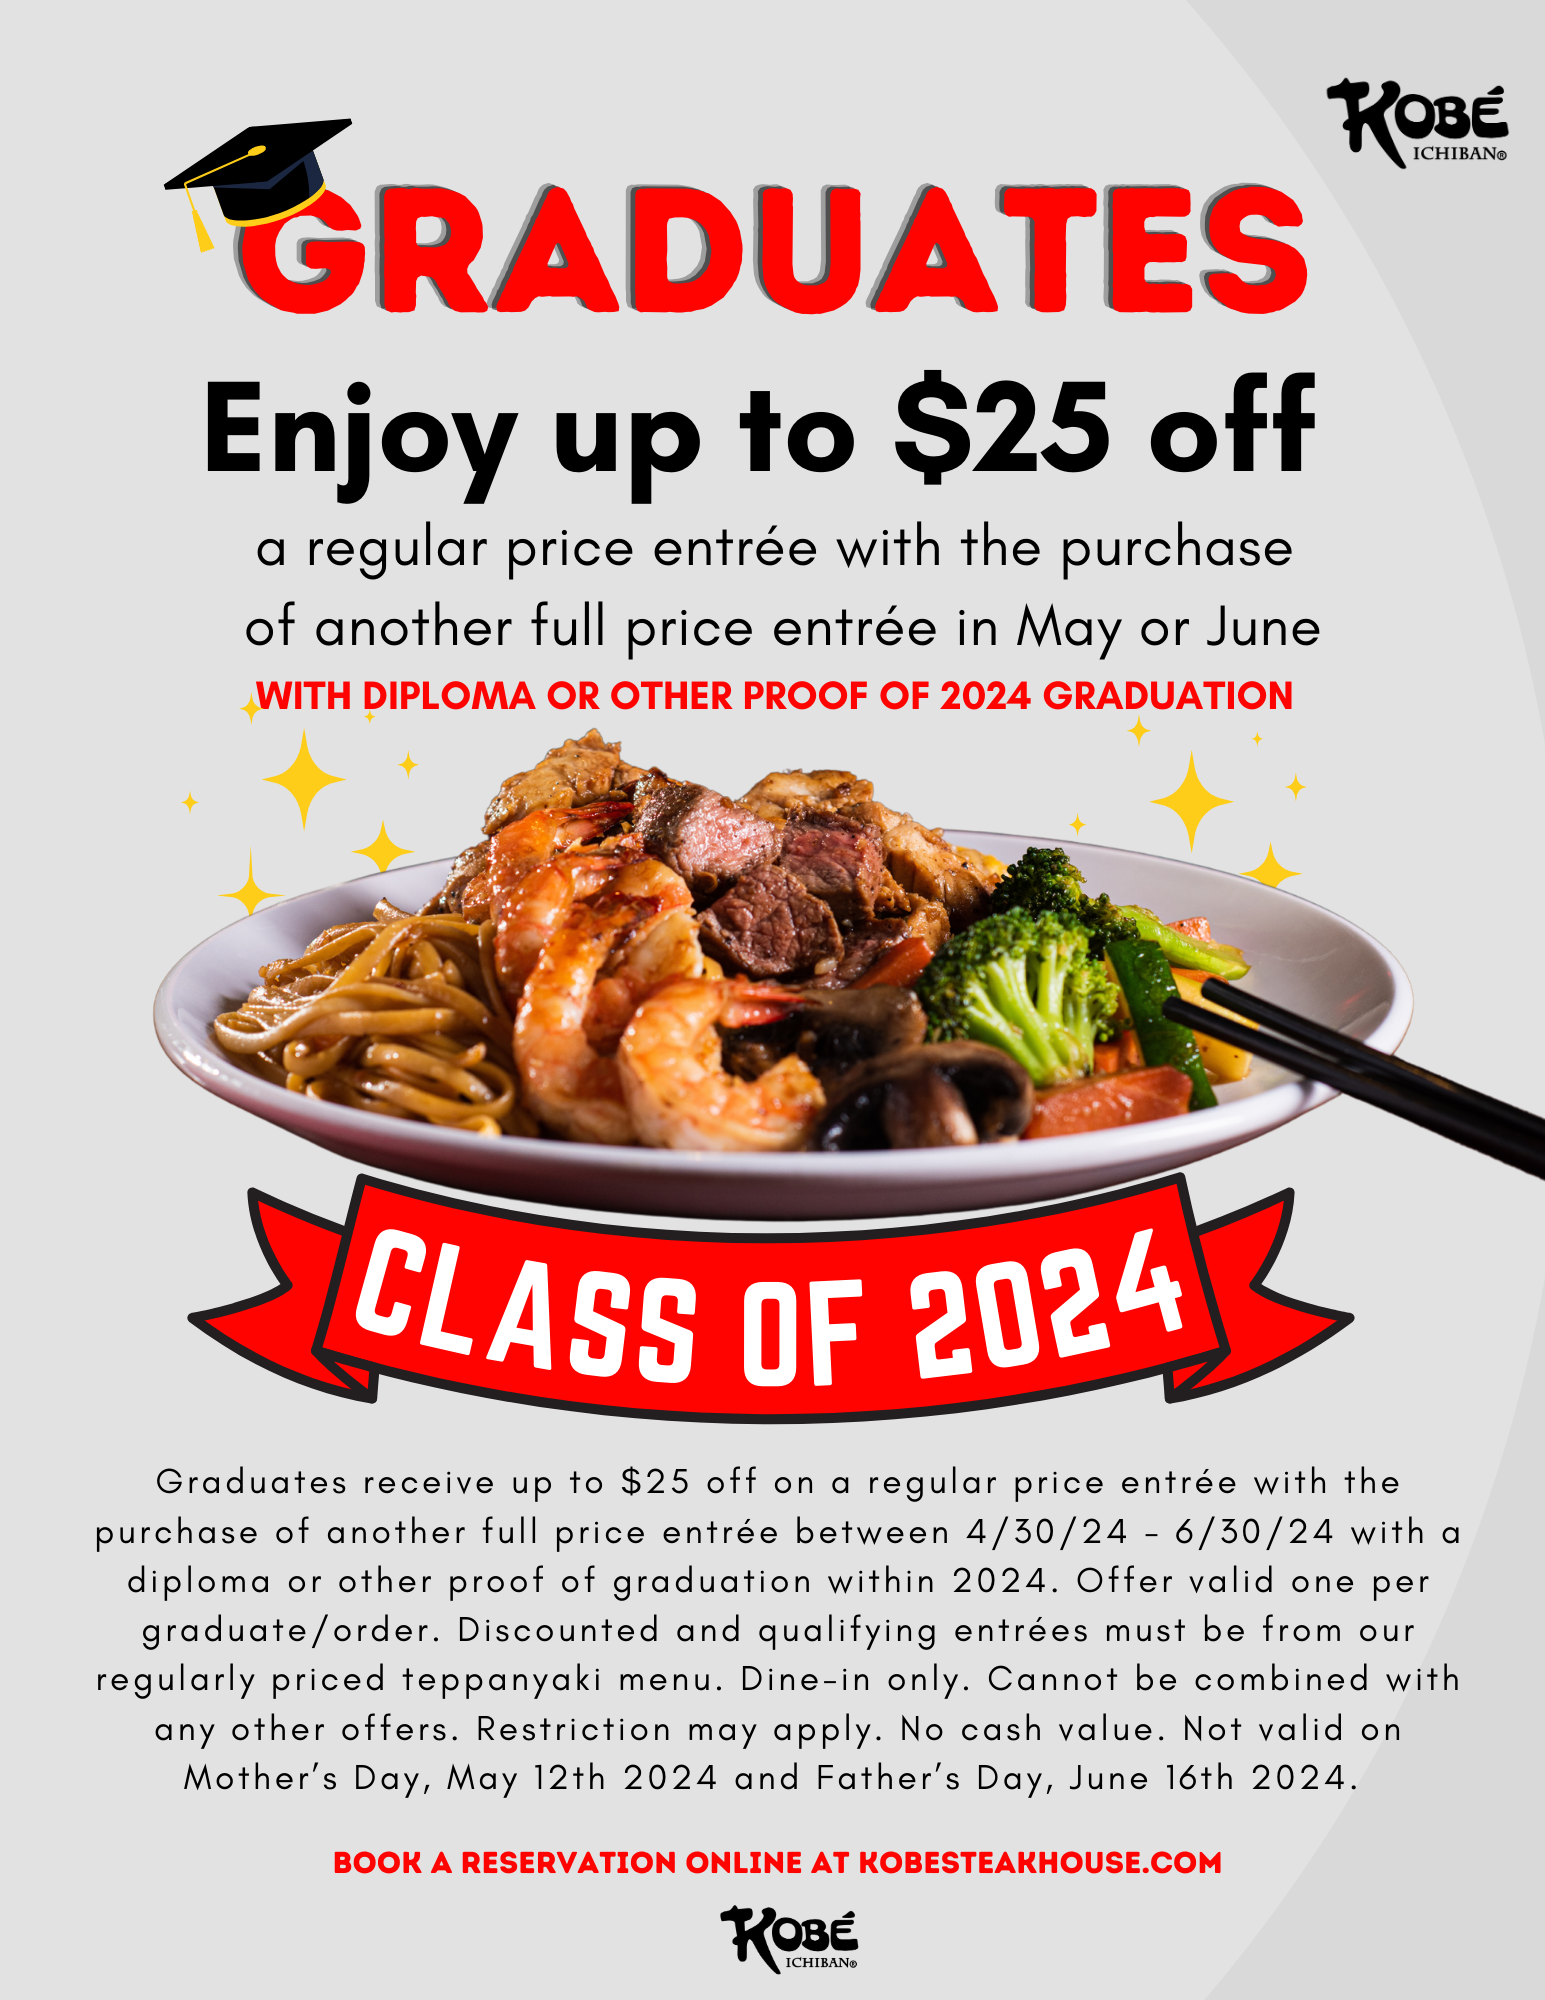 Graduates receive up to $25 off on a regular price entrée with the purchase of another full price entrée between 4/30/24 - 6/30/24 with a diploma or other proof of graduation within 2024. Offer valid one per graduate/order. Discounted and qualifying entrées must be from our regularly priced teppanyaki menu. Dine-in only. Cannot be combined with any other offers. Restriction may apply. No cash value. Not valid on Mother’s Day, May 12th 2024 and Father’s Day, June 16th 2024. 